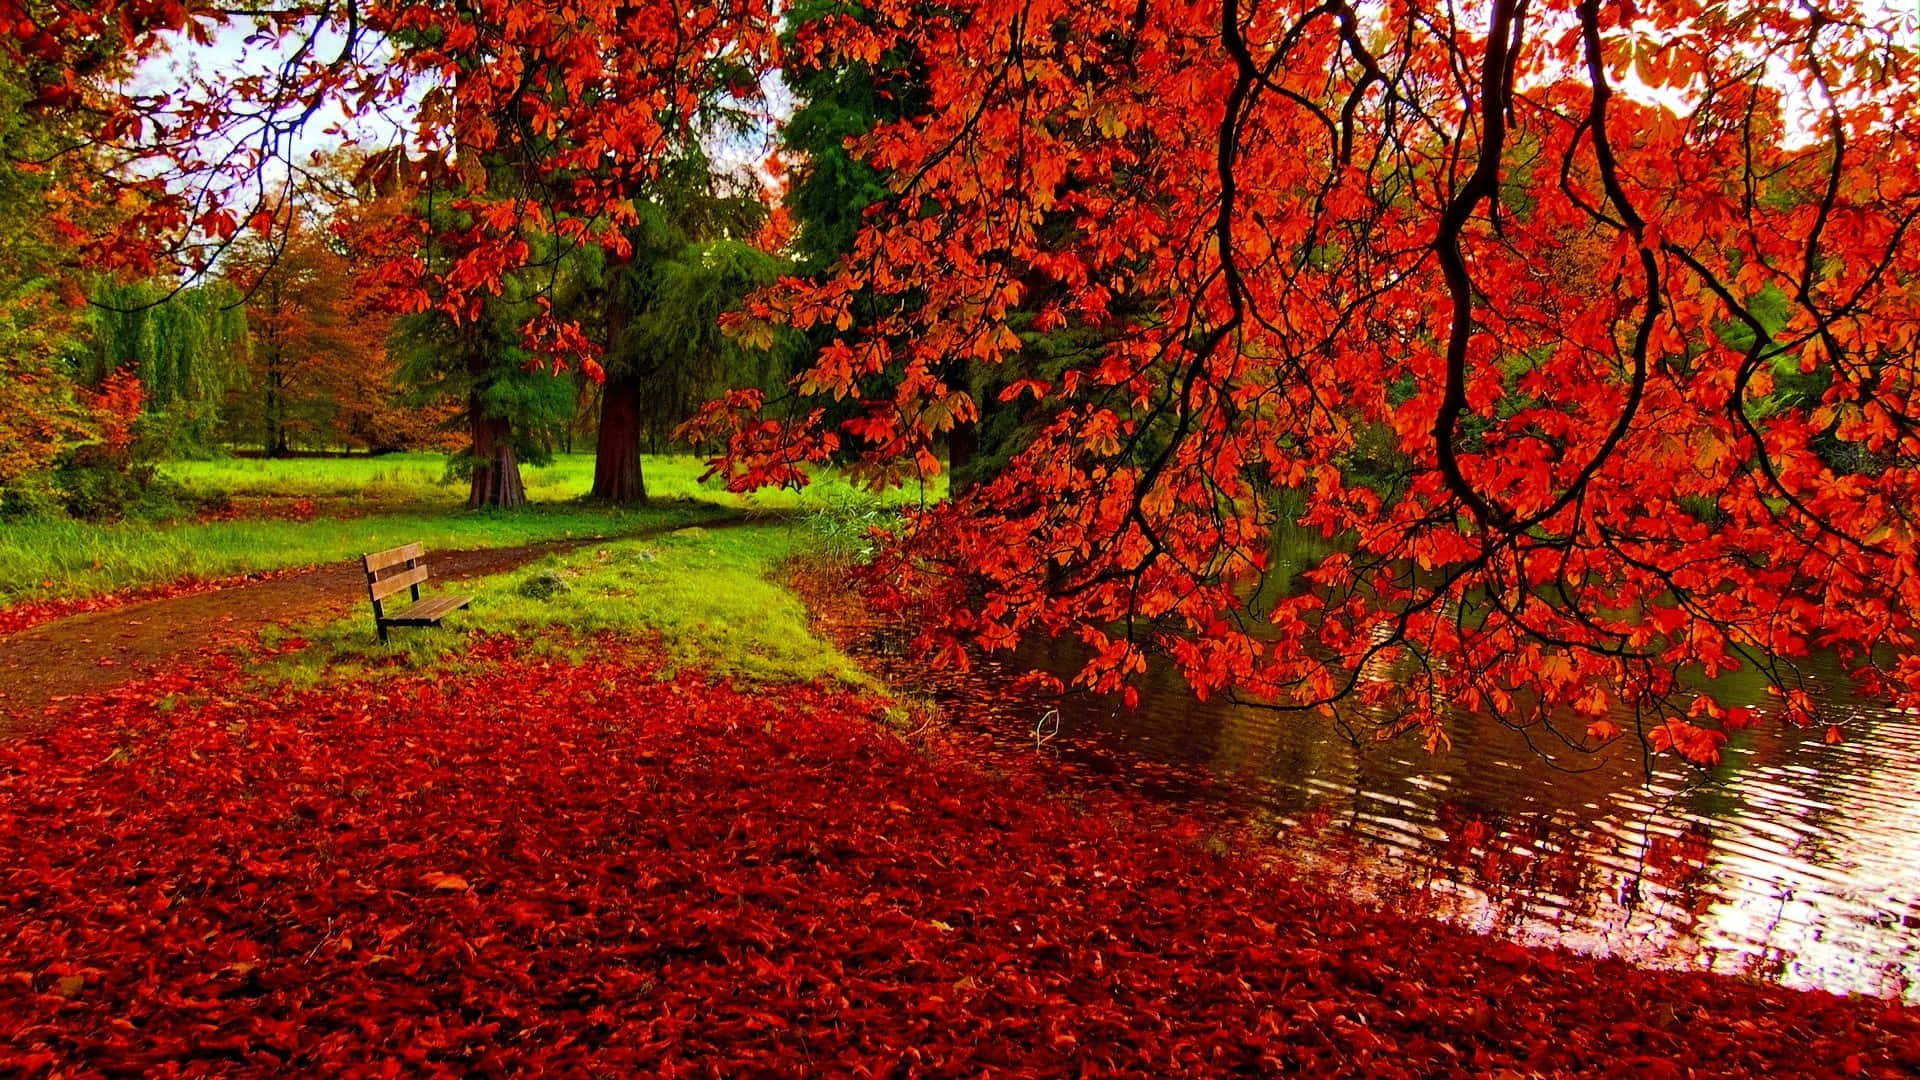 Blowing autumn leaves on a windy day Wallpaper